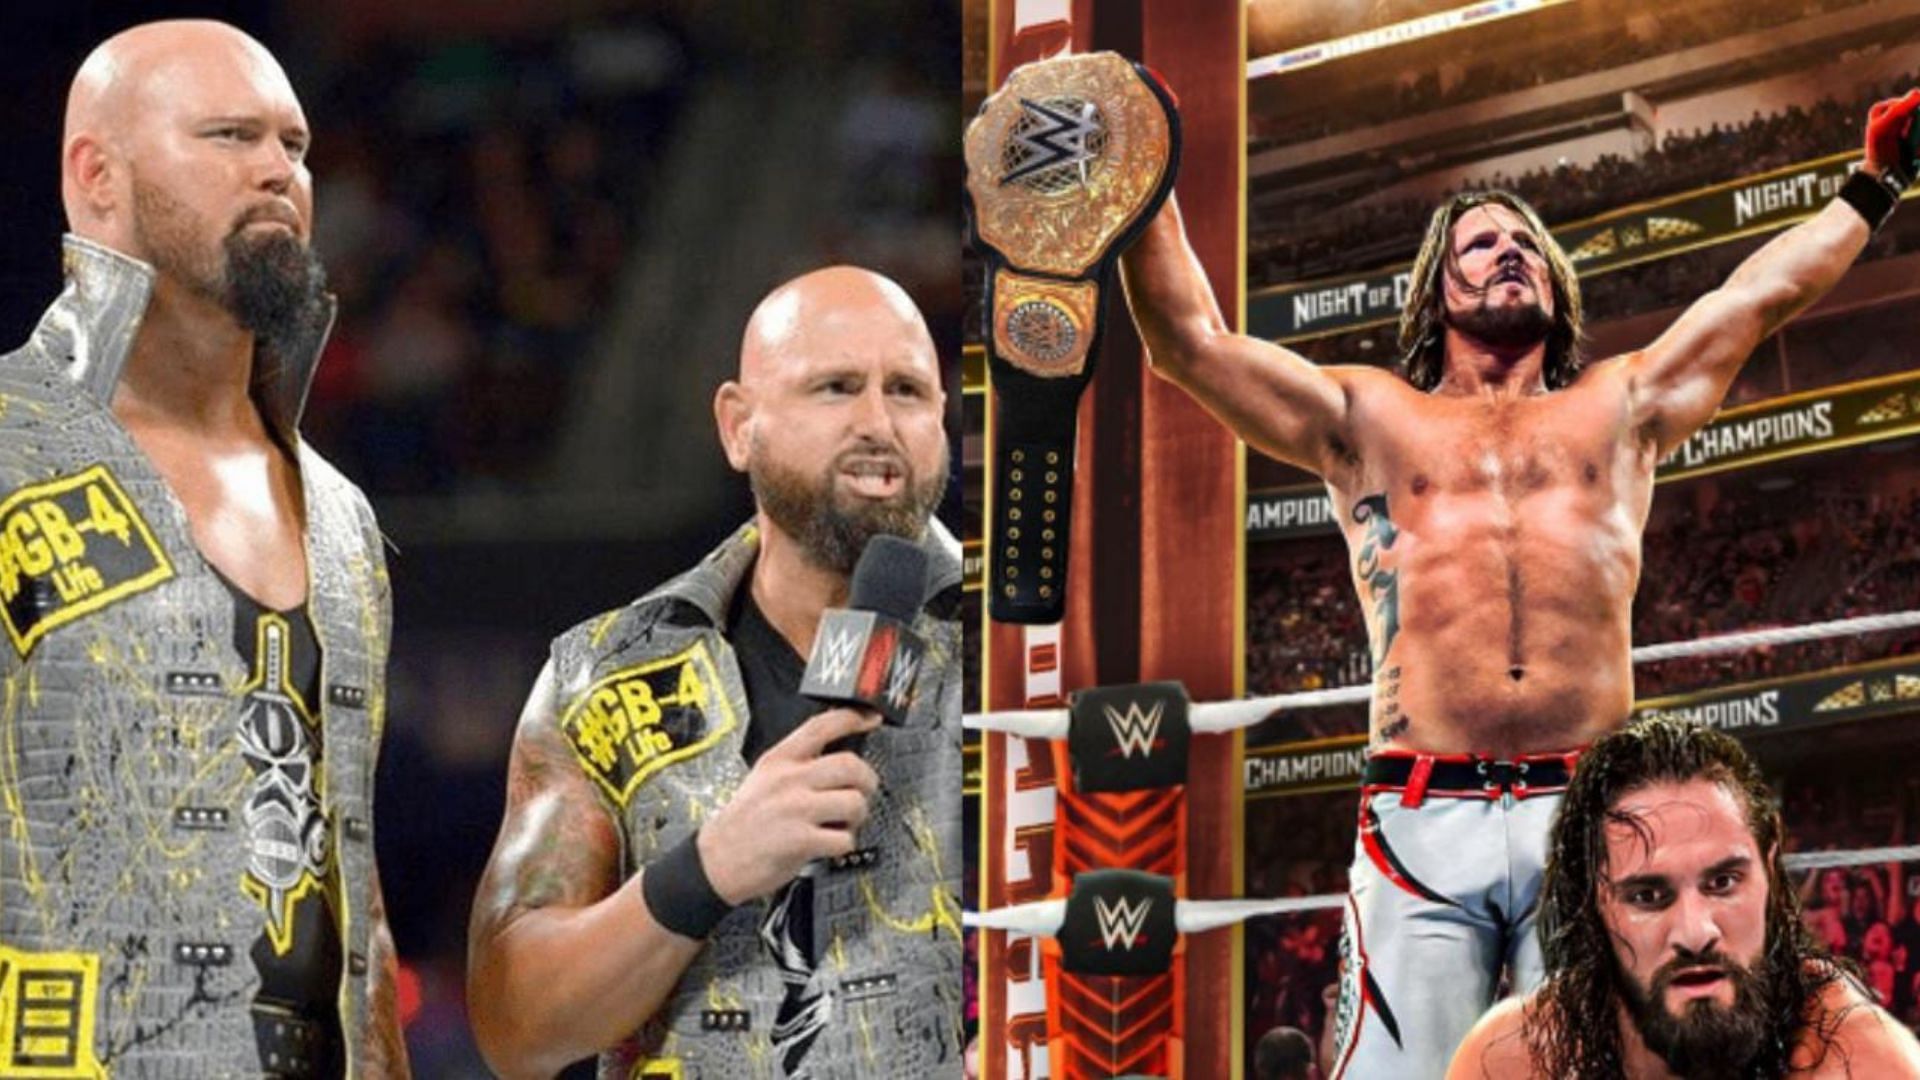 Who could The O.C. side with if they turn on AJ Styles?